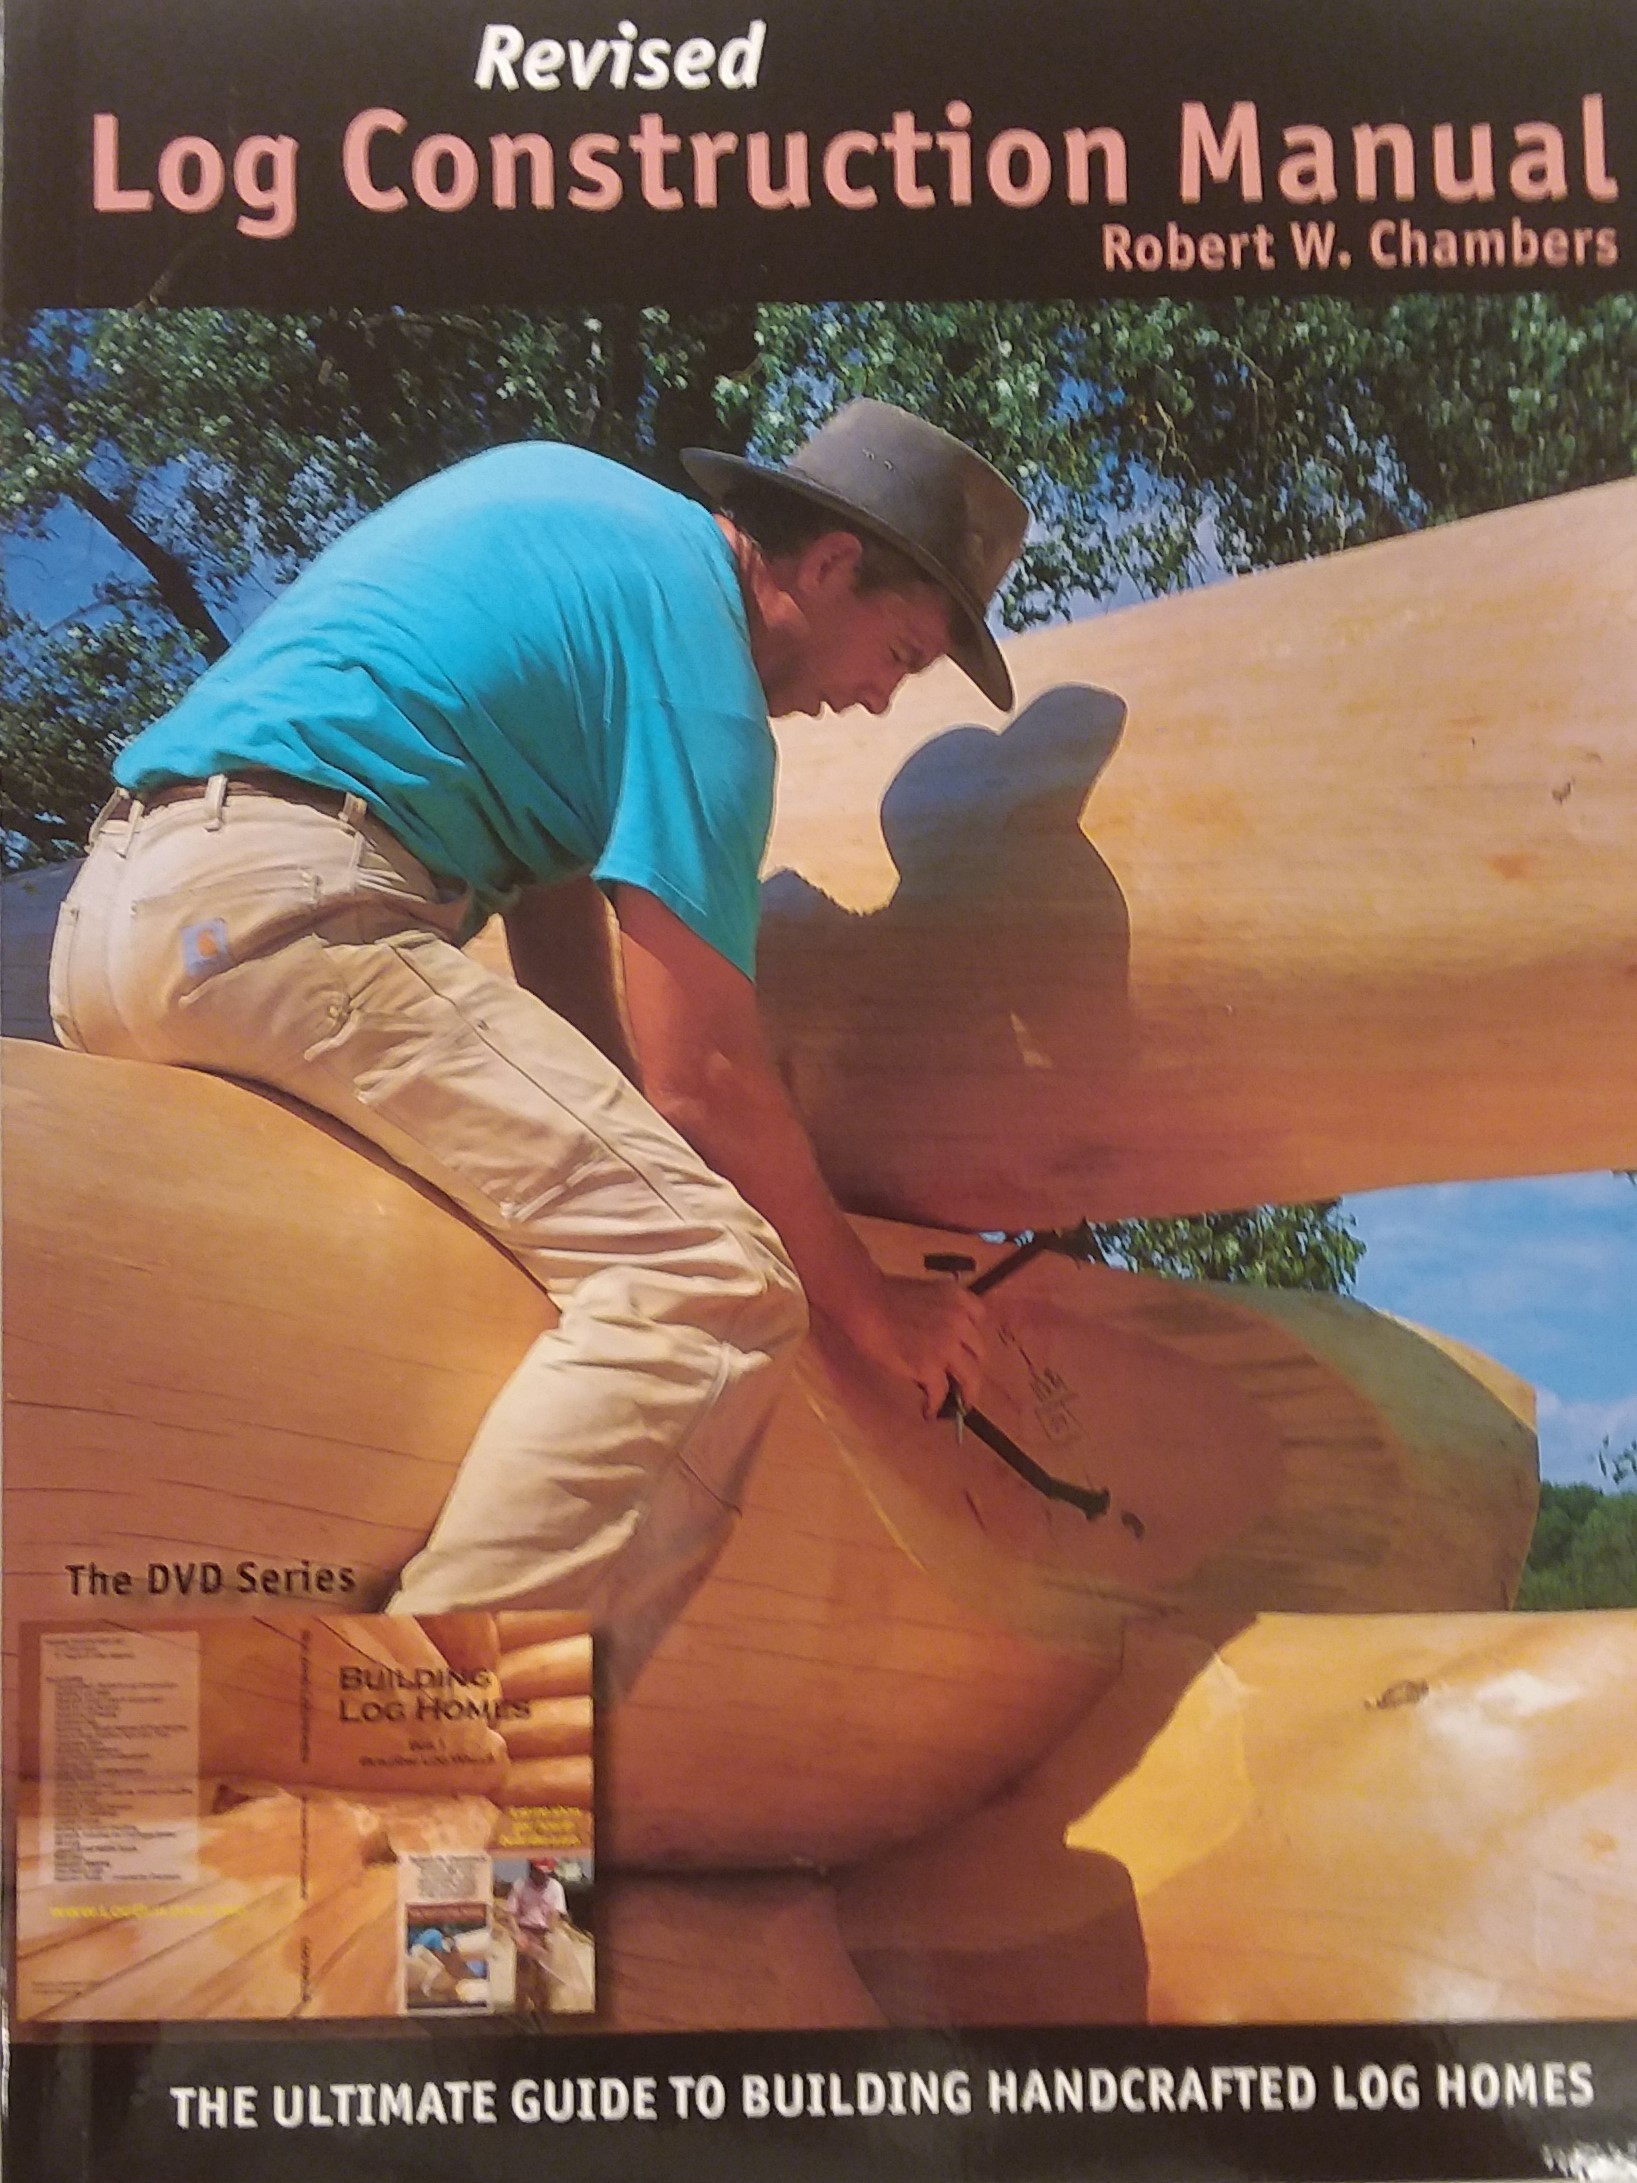 Log Construction Manual by Robert Chambers (Revised)